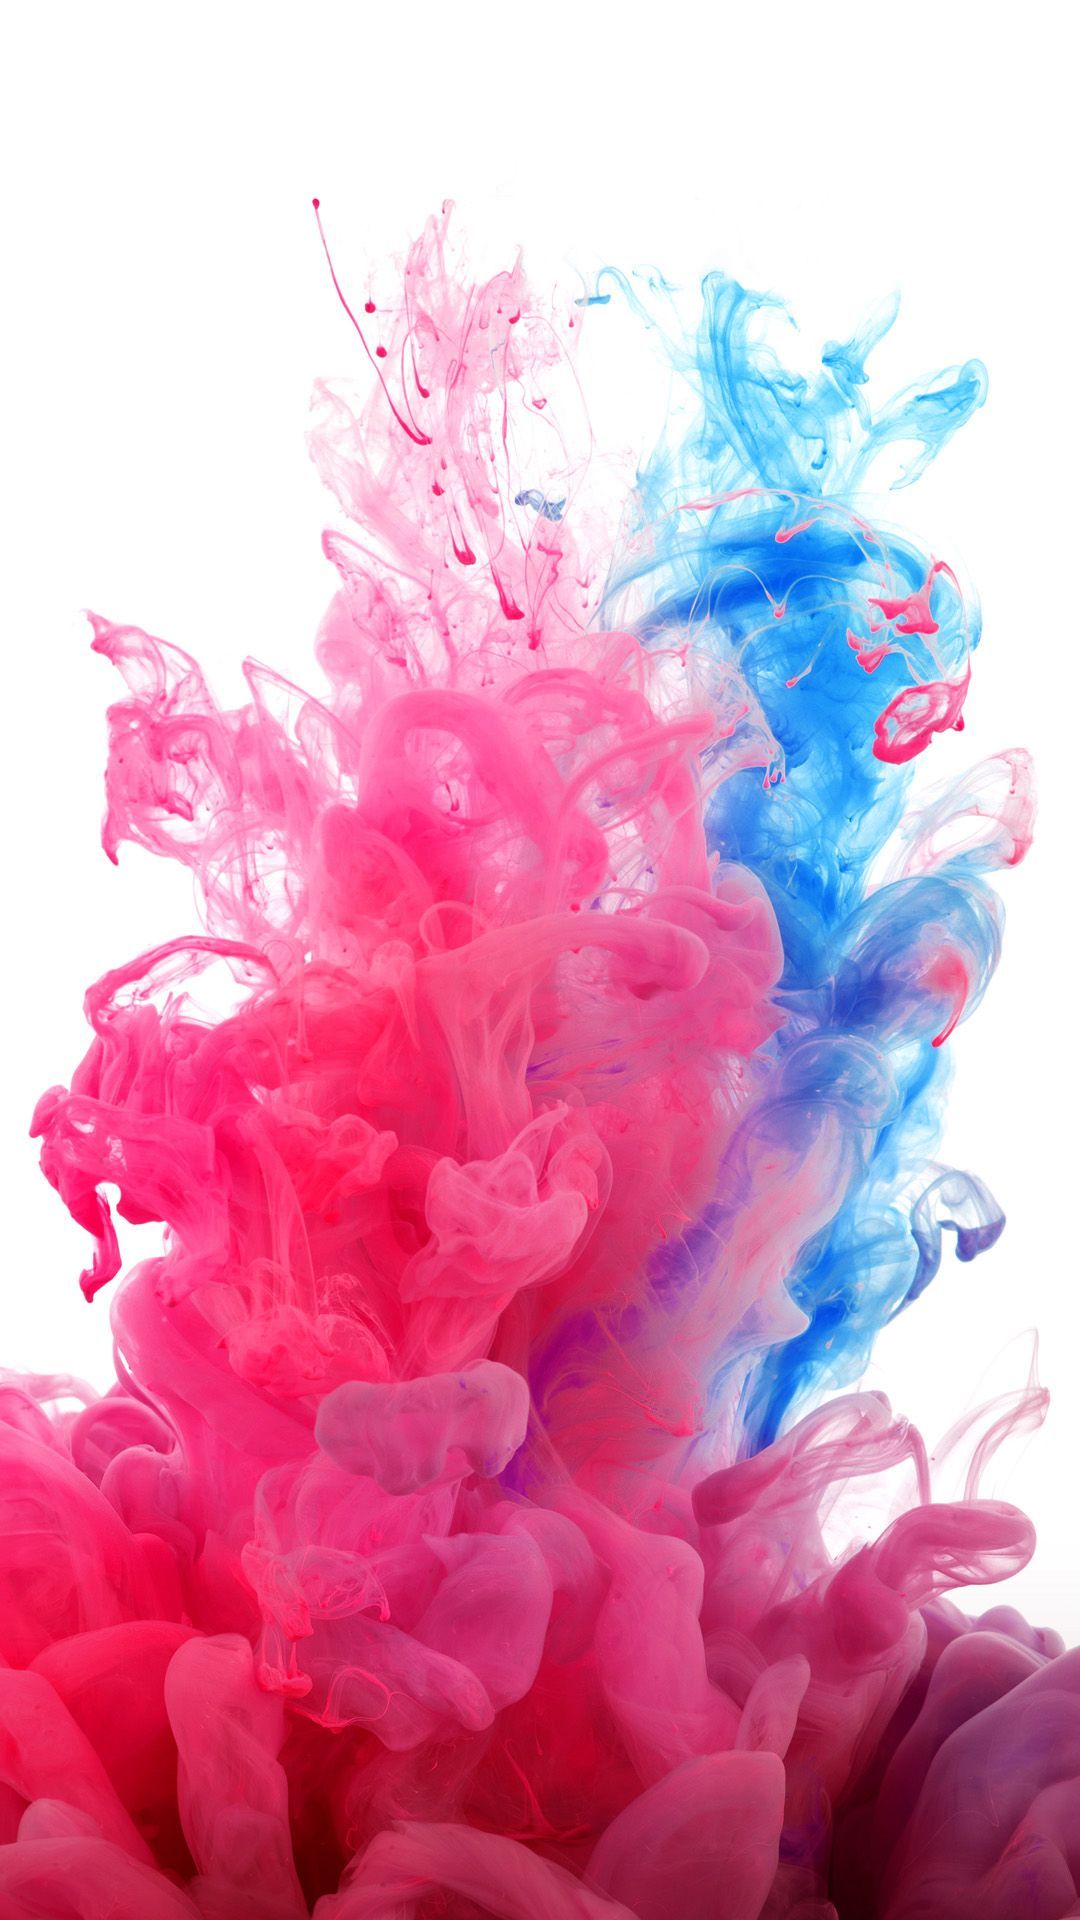 Pink & Blue Smoke 1080 x 1920 Wallpaper available for free